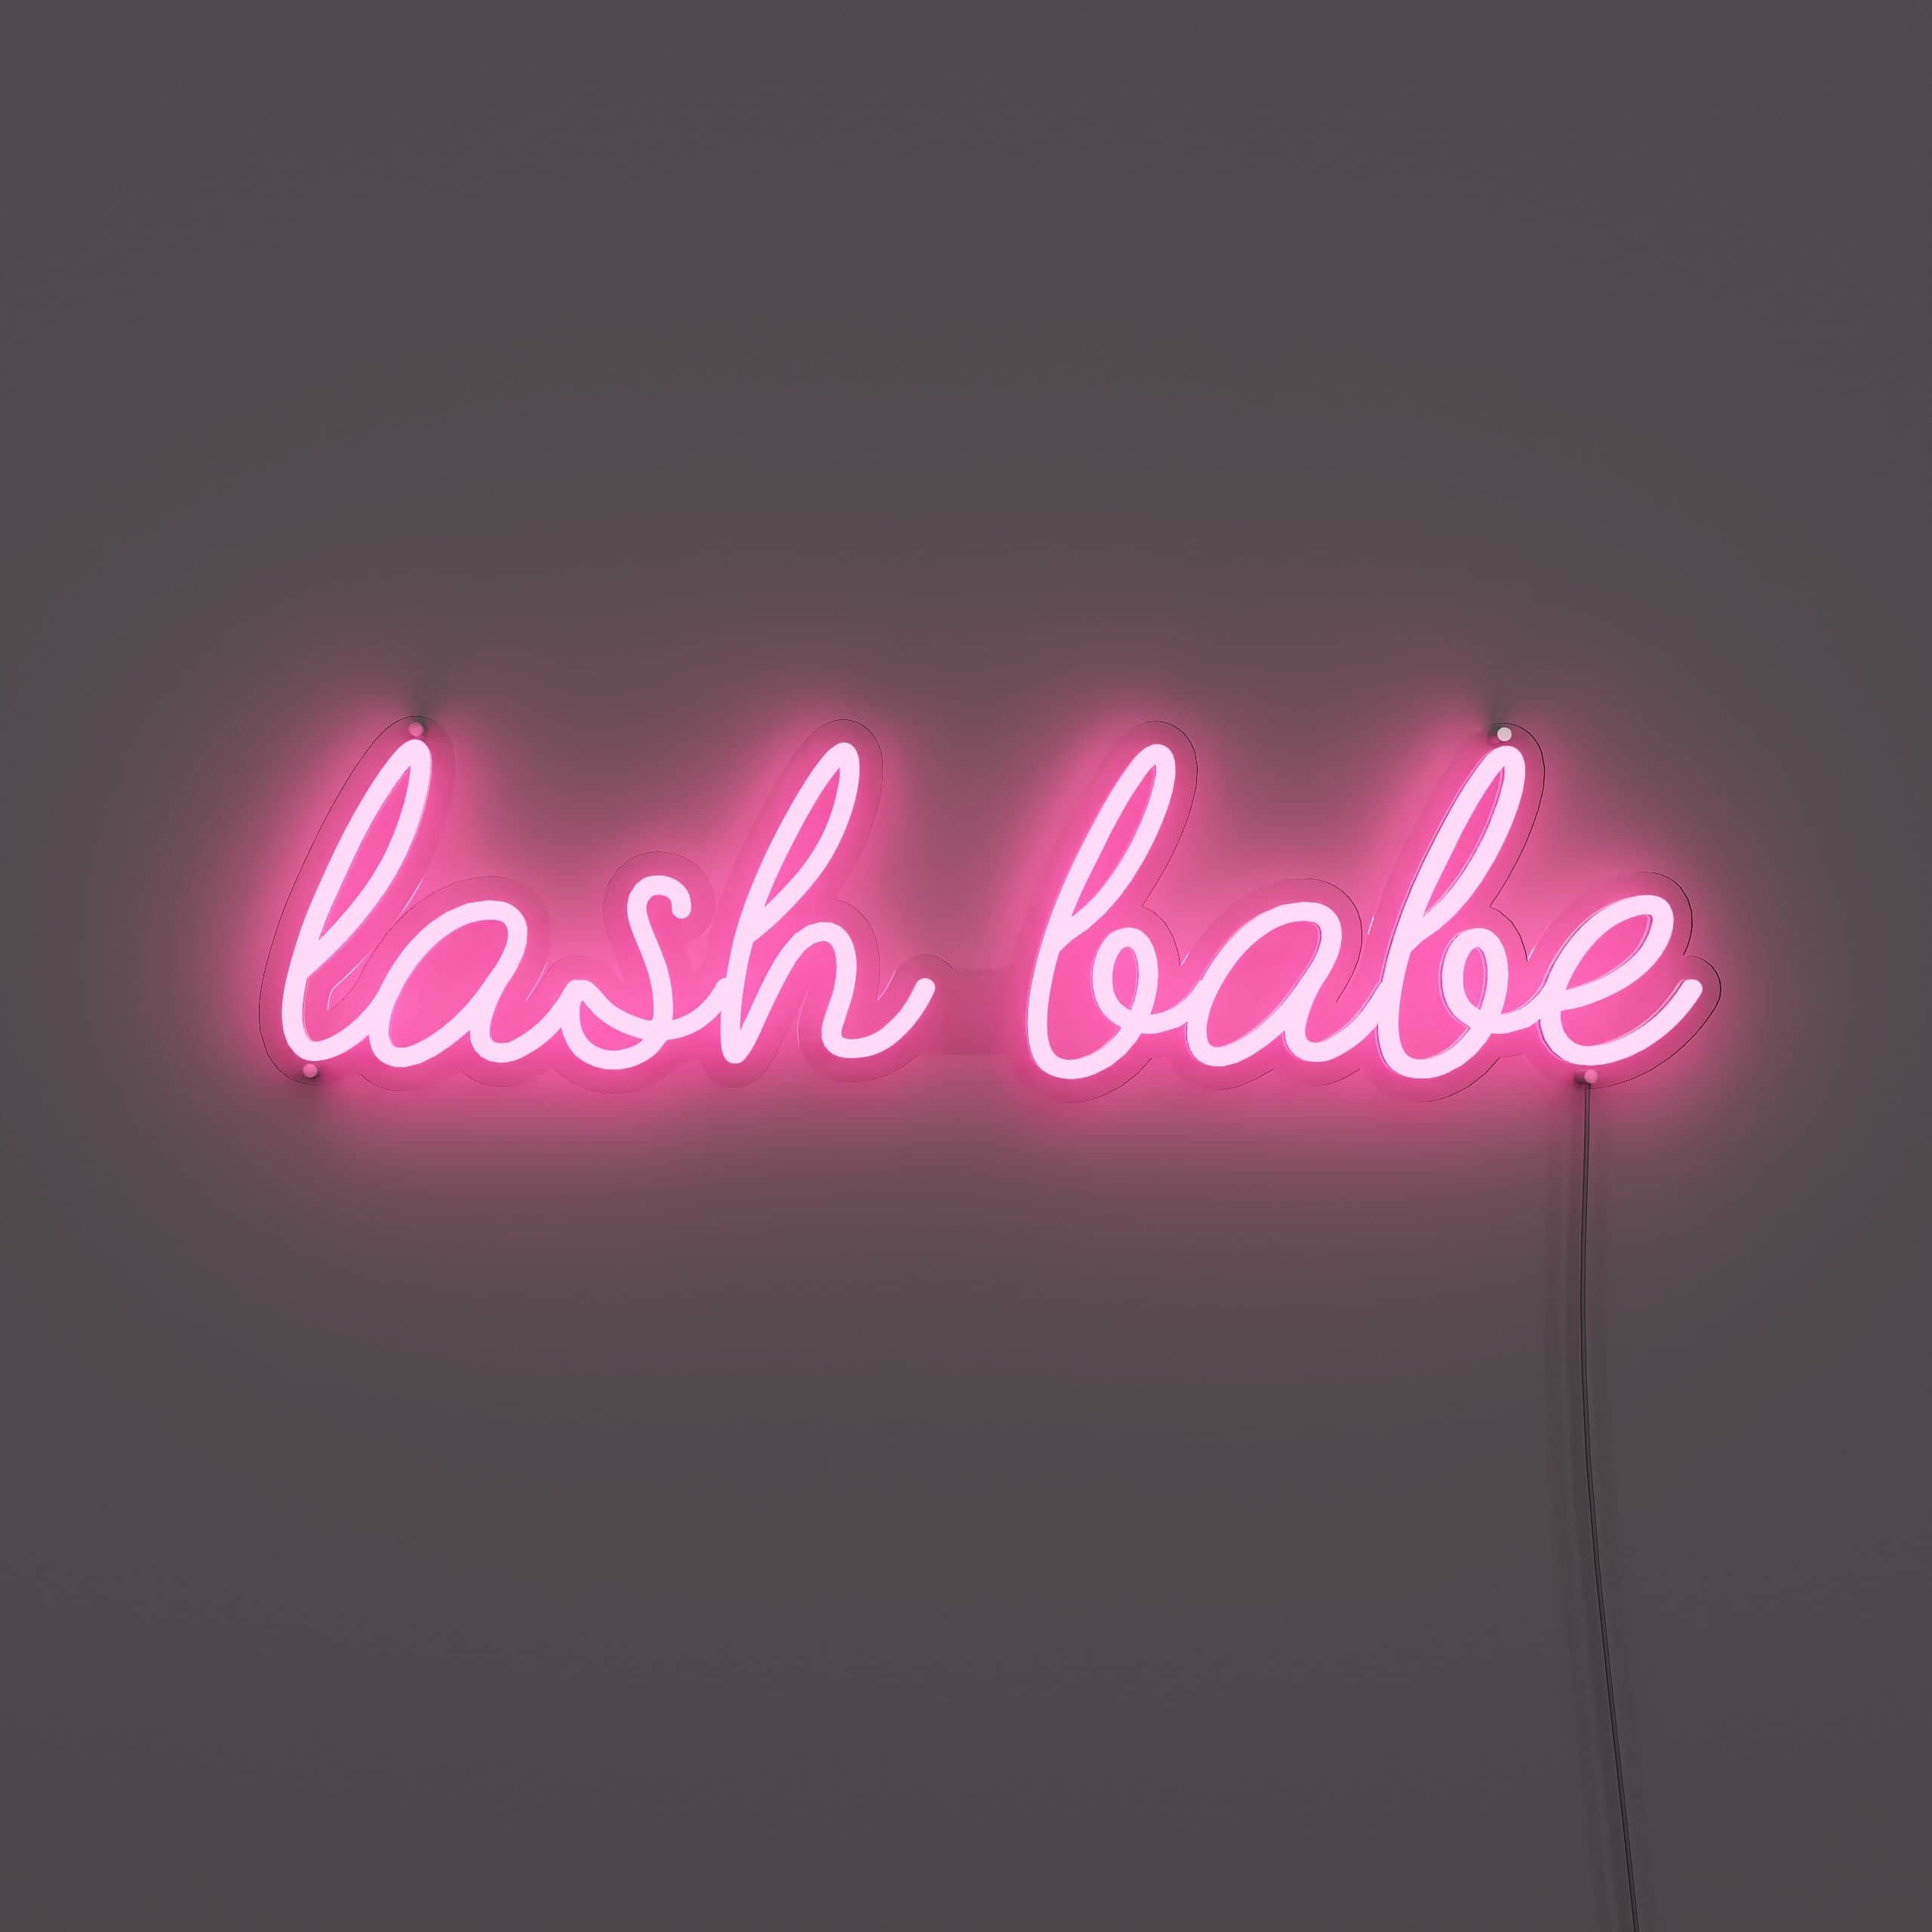 unleash-the-beauty-of-your-lashes!-neon-sign-lite